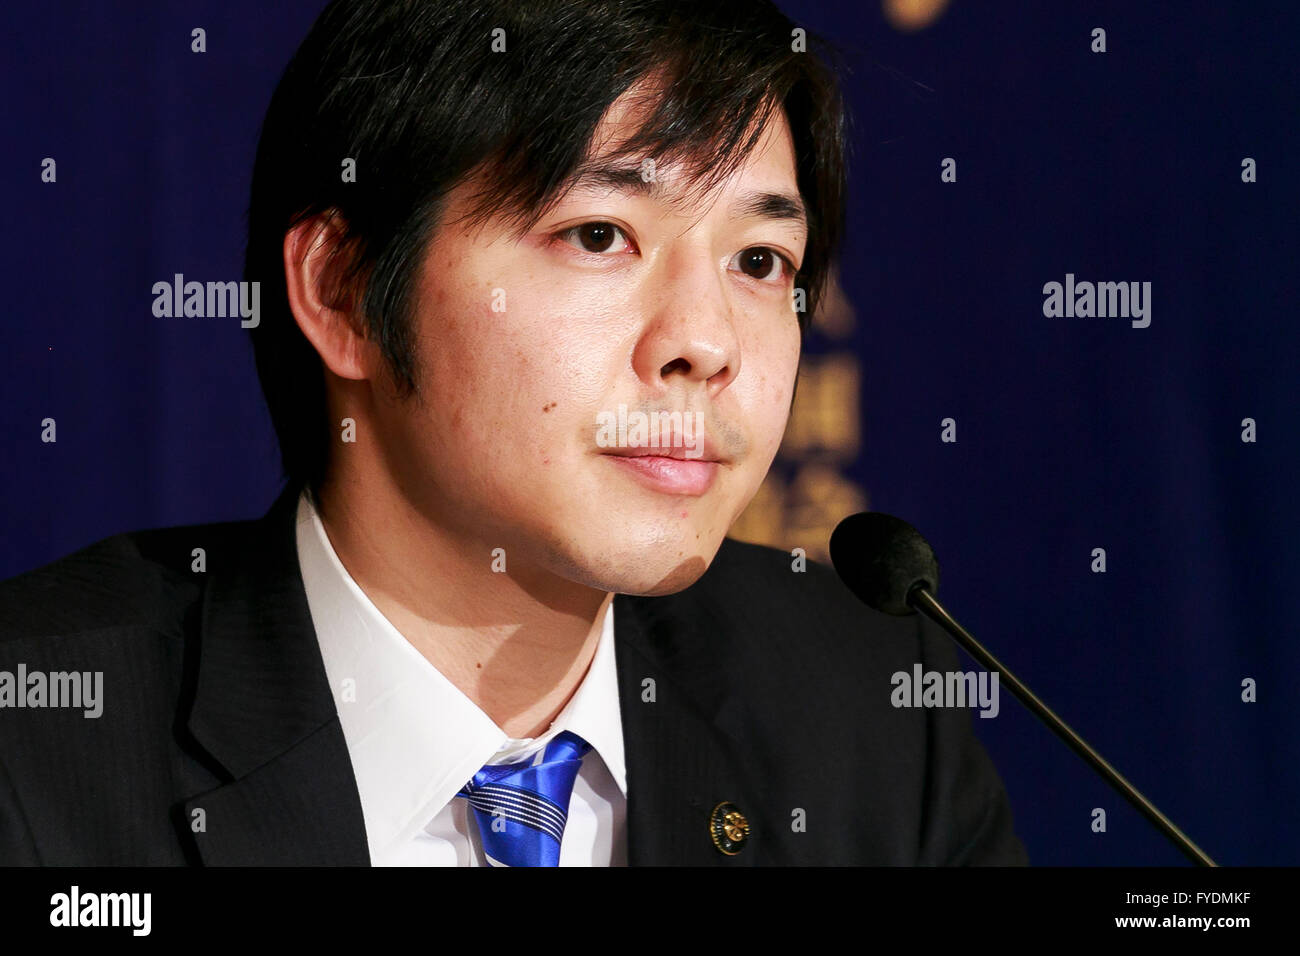 Naomichi Suzuki Mayor of Yubari city in Hokkaido attends a press conference at the Foreign Correspondents' Club of Japan on April 26, 2016, Tokyo, Japan. Suzuki, who at the age of 30 became Japan's youngest mayor in 2011, spoke about his ongoing challenges to revitalise the bankrupt economy of Yubari. Faced with a shrinking population and the decline of the local coal-mining industry Suzuki turned to renewable energy to try to boost the local economy. He was re-elected in 2015 and is continuing to work to revitalize the city. © Rodrigo Reyes Marin/AFLO/Alamy Live News Stock Photo